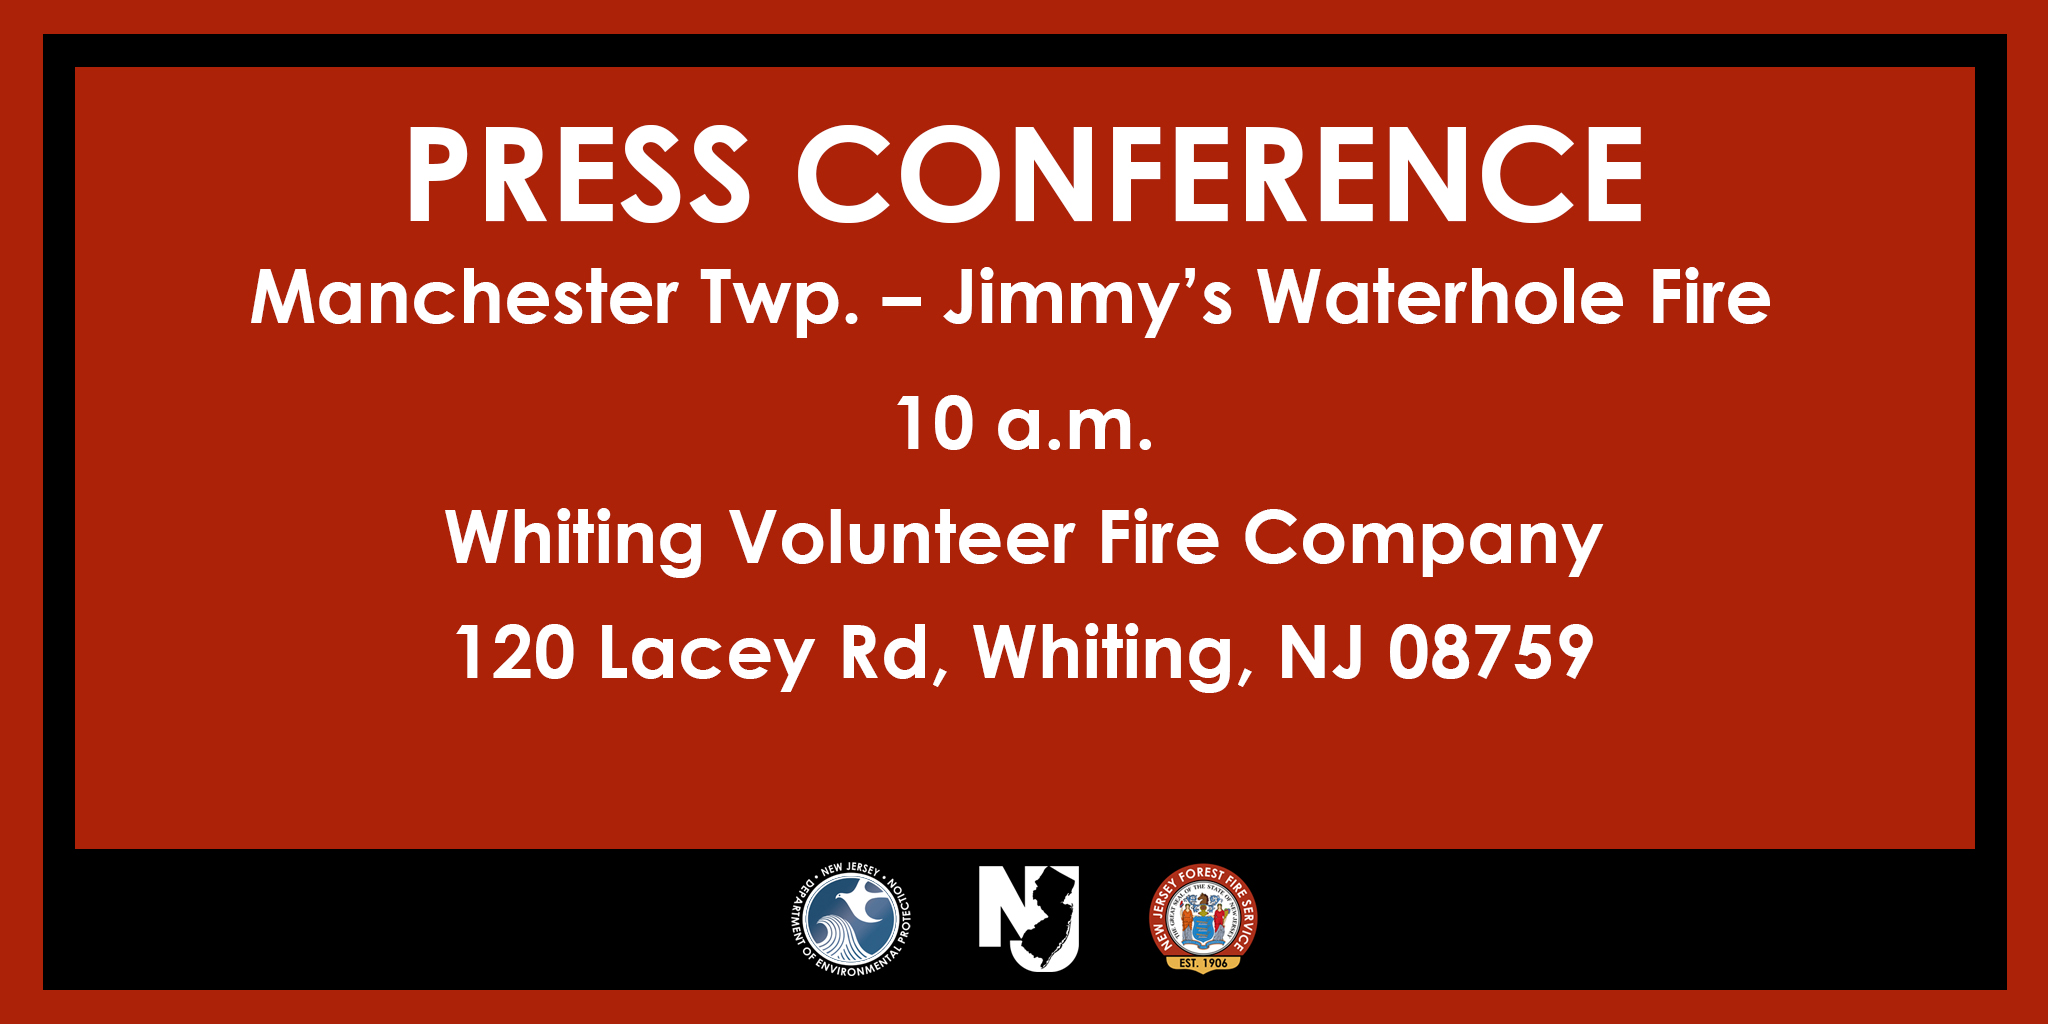 Samle Monumental frugtbart New Jersey Forest Fire Service on X: "PRESS CONFERENCE: Today at 10 a.m. at  the Whiting Volunteer Fire Company, 120 Lacey Road, in Whiting, Ocean County,  the New Jersey Forest Fire Service